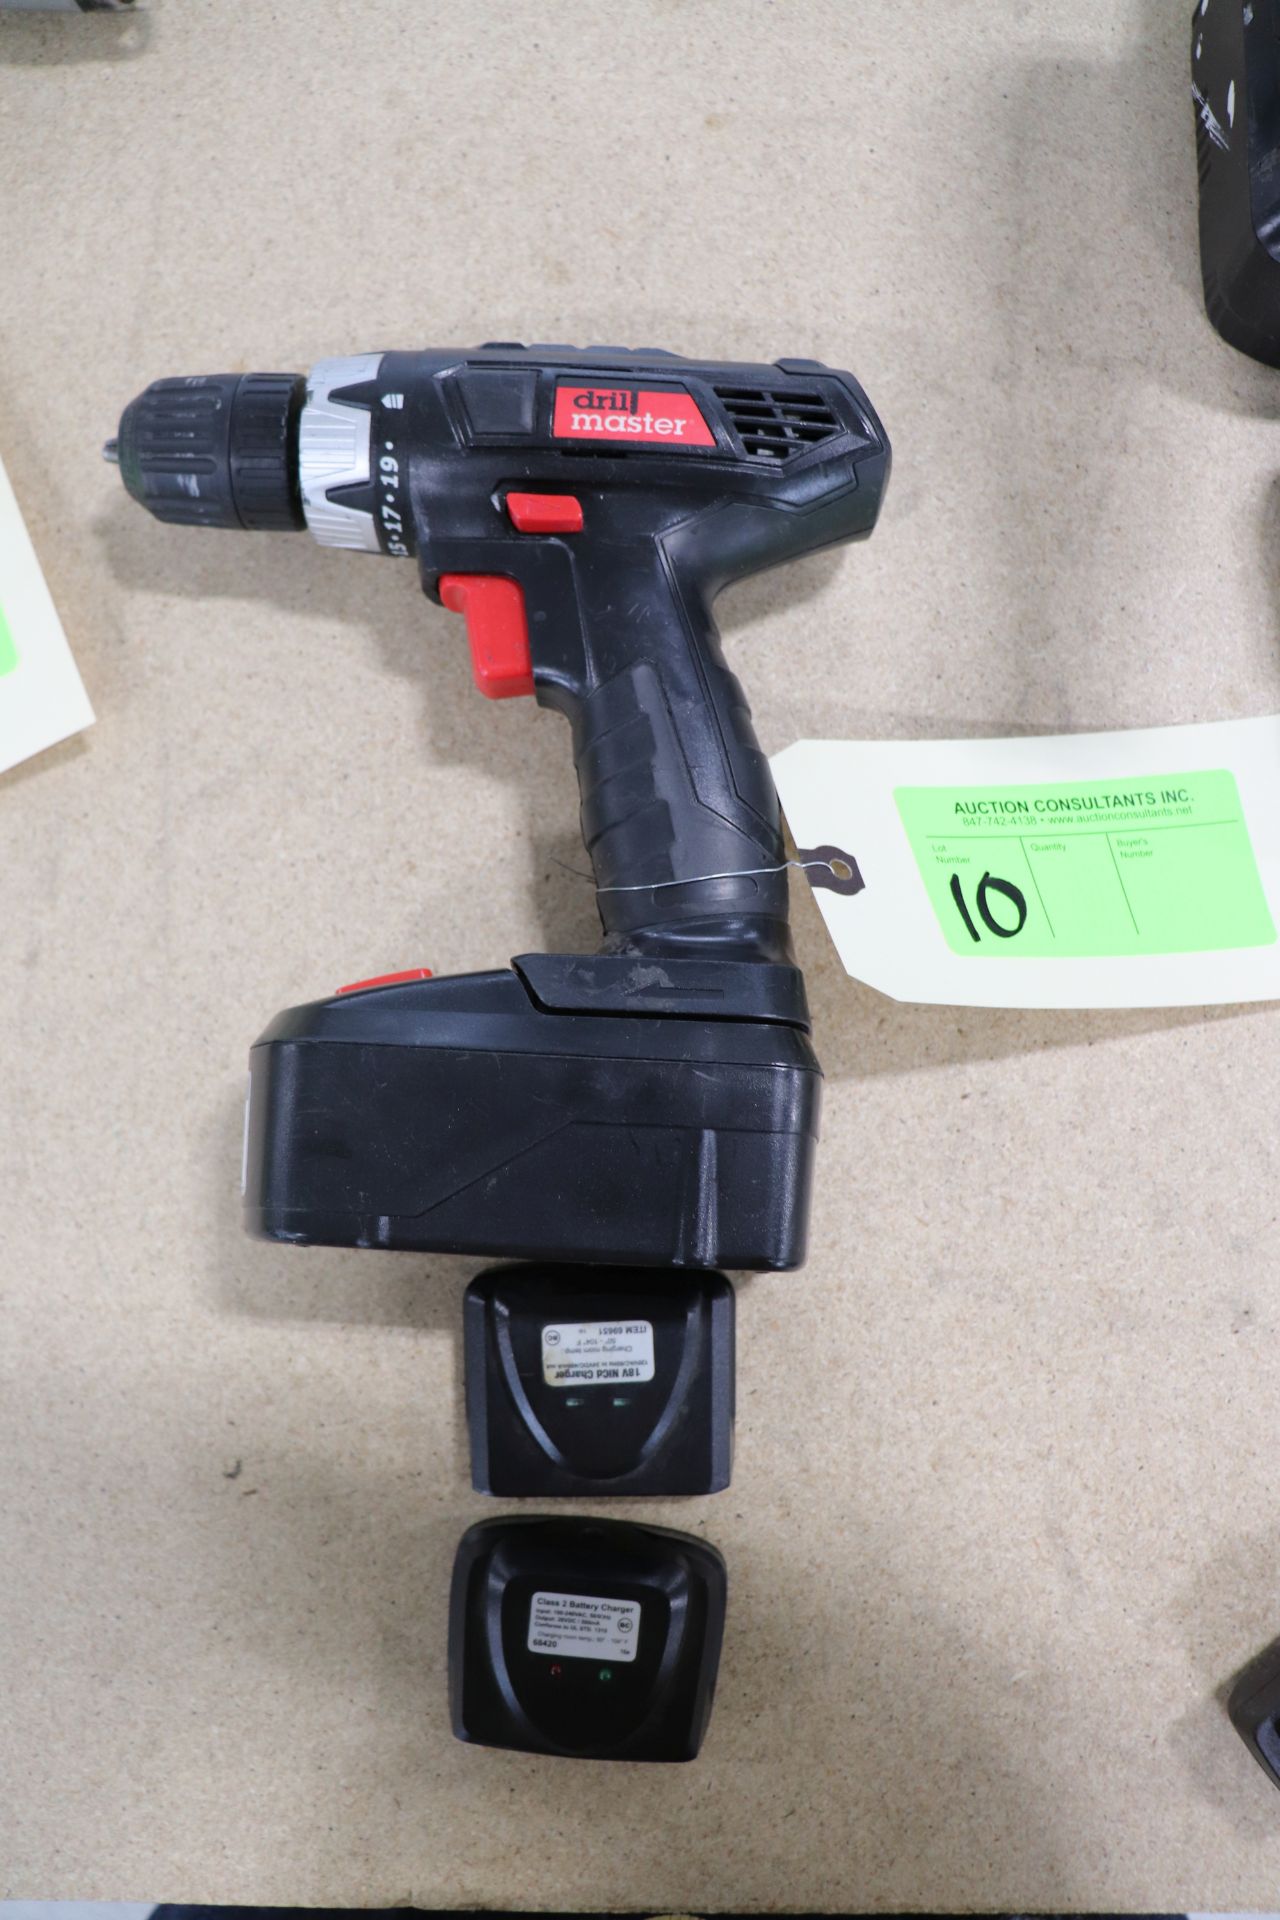 Drillmaster 18-volt 3/8 drill with charger